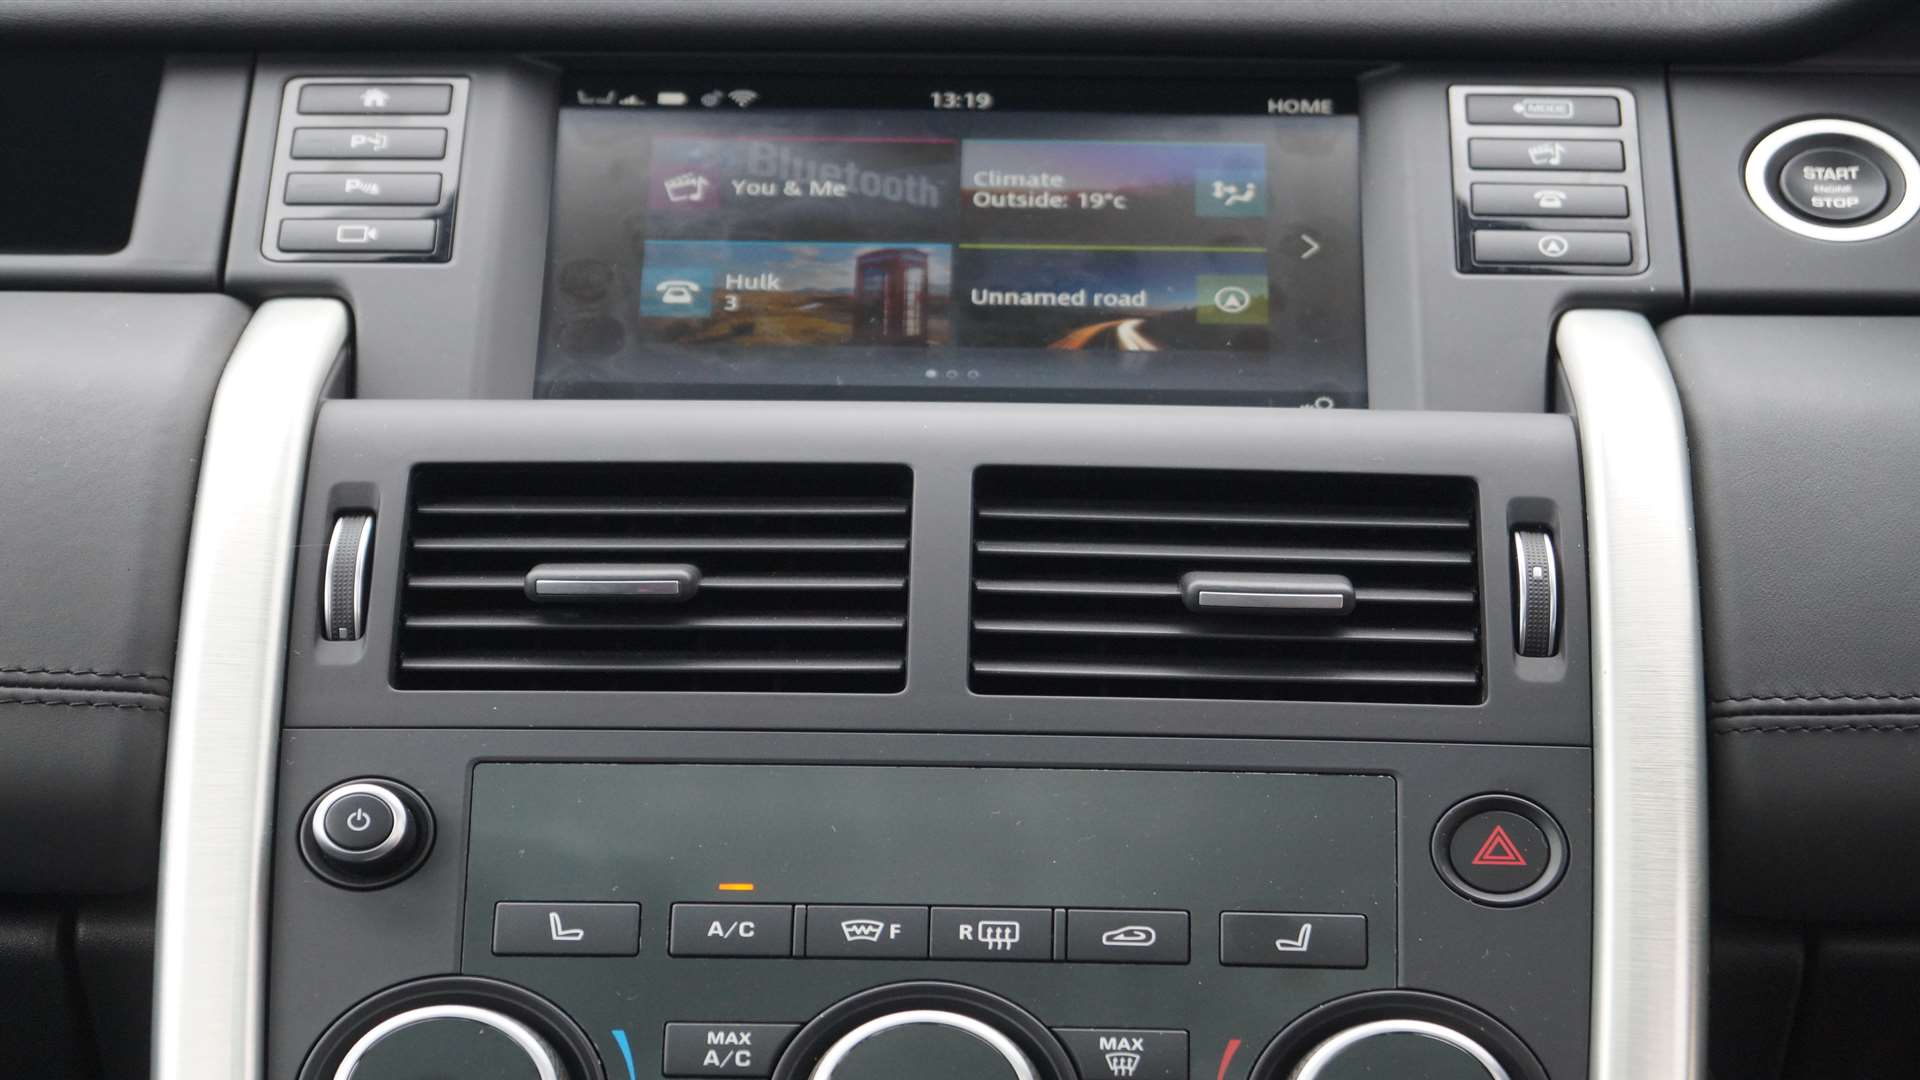 The infotainment system is much-improved